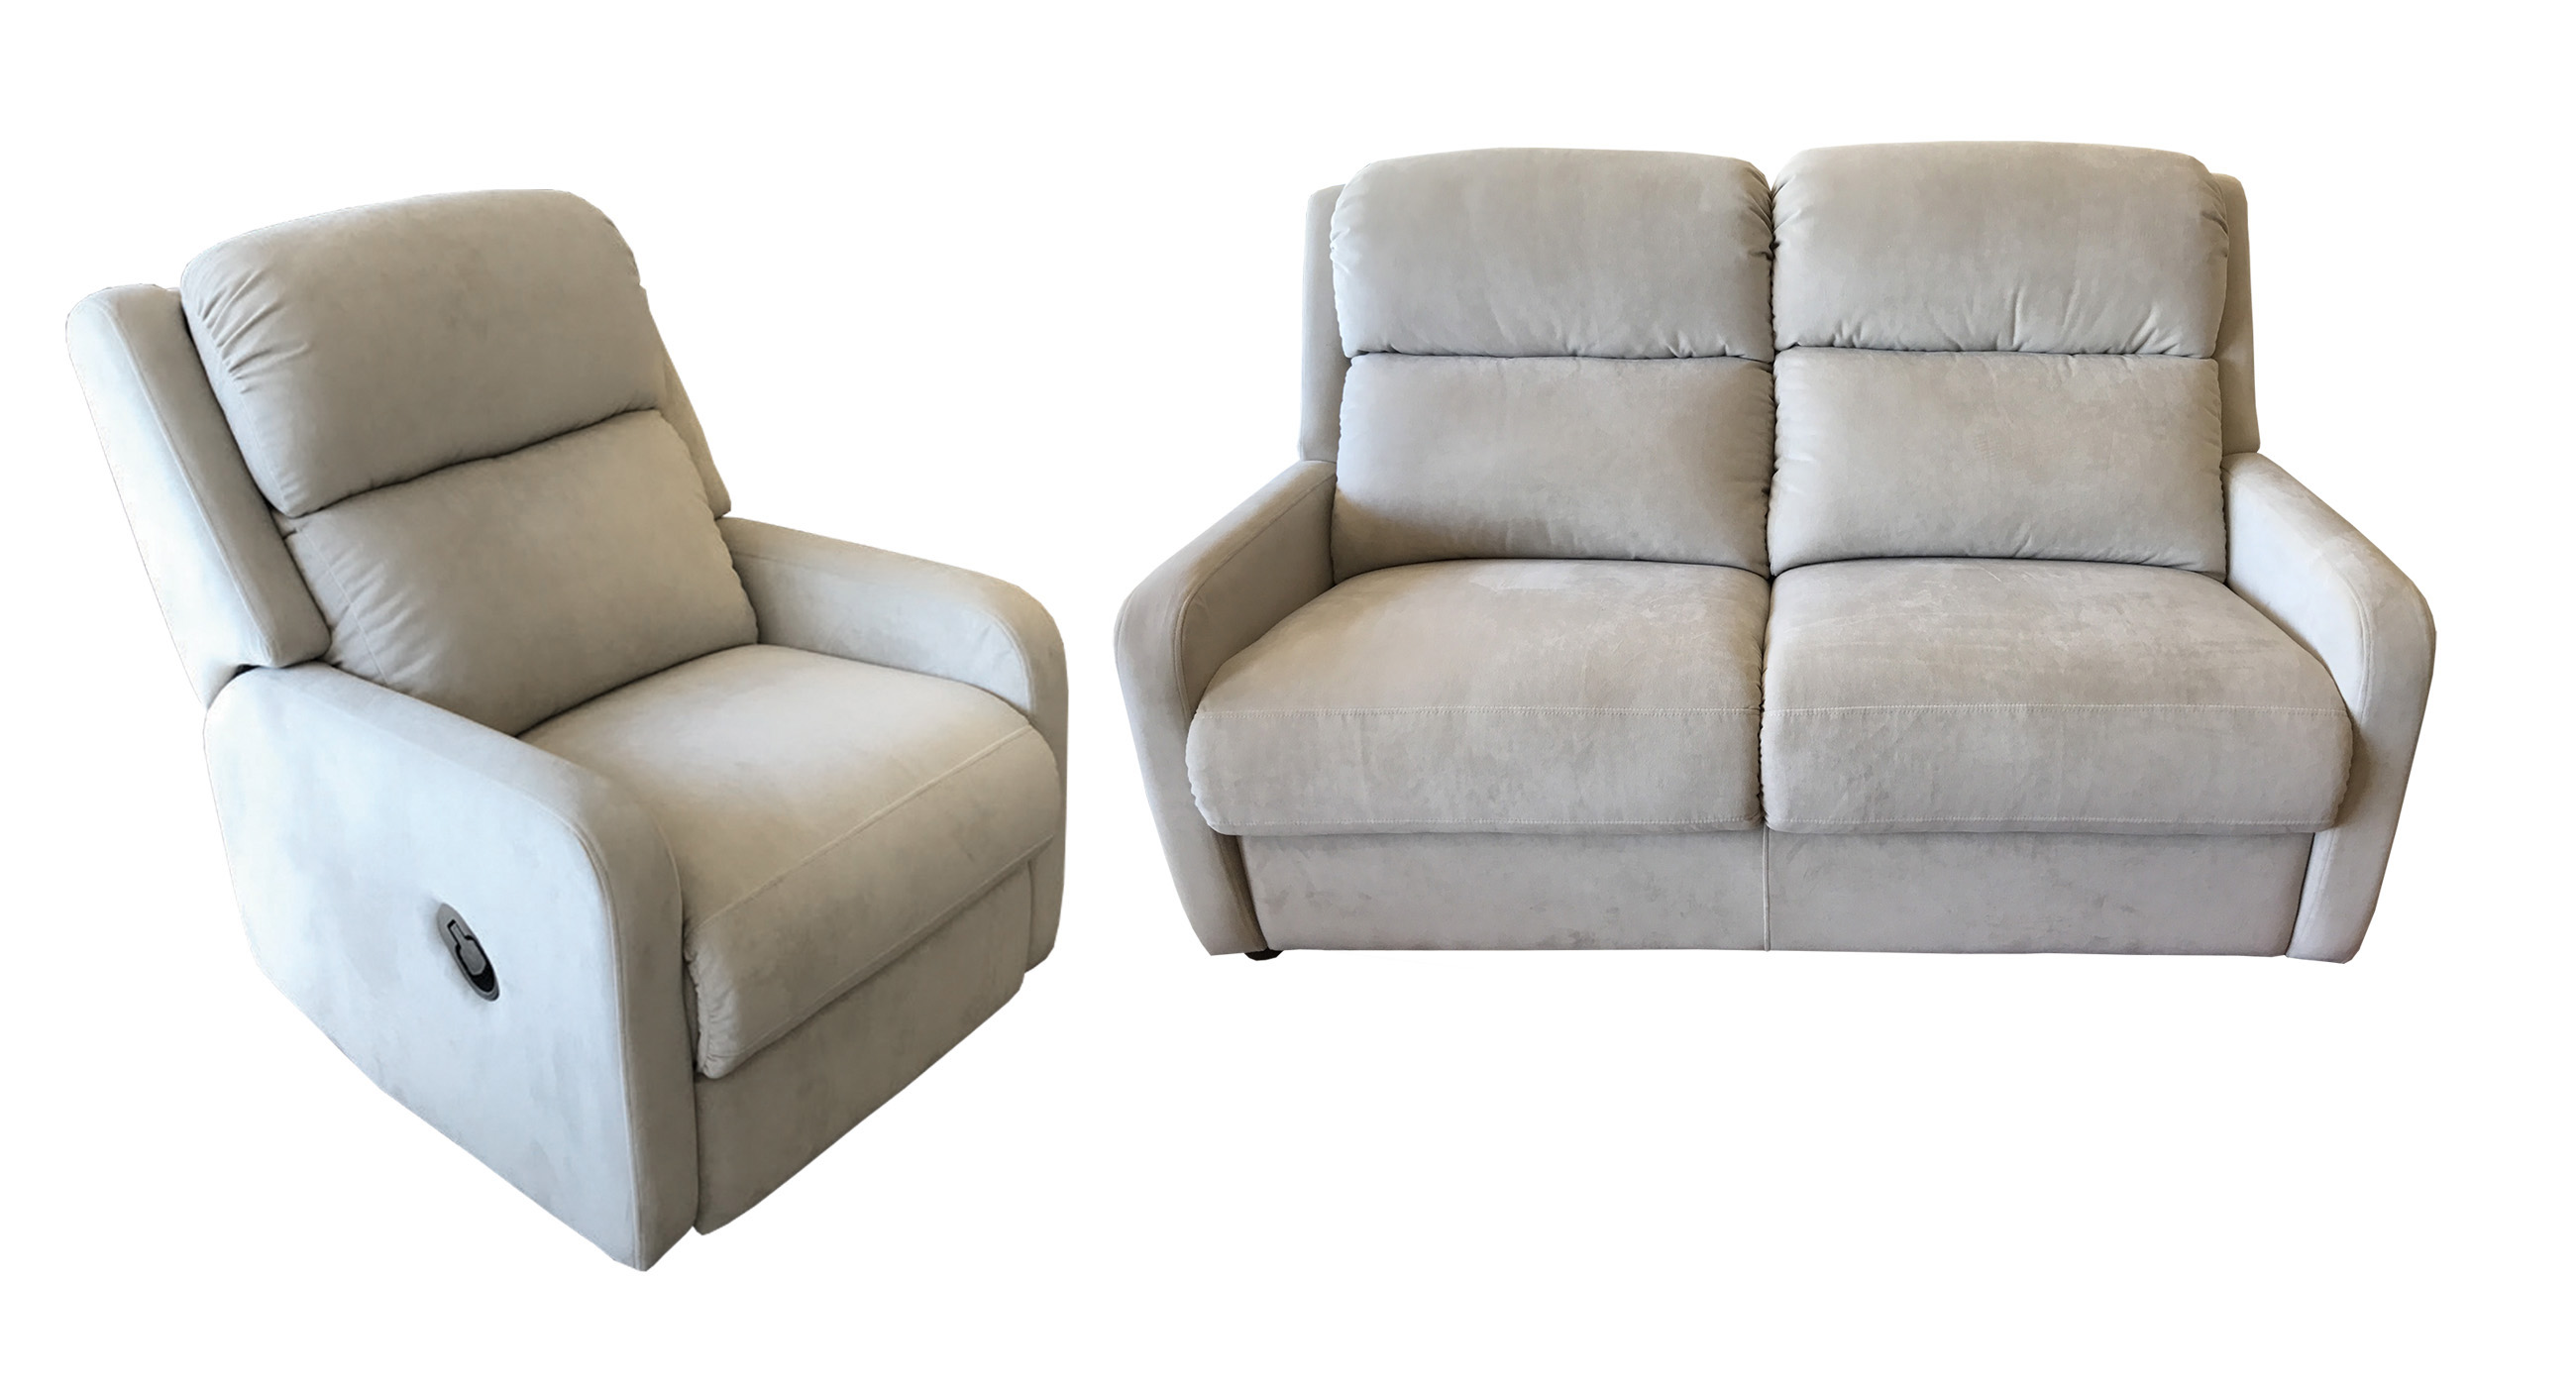 Haley Reclining Sofa and Chairs